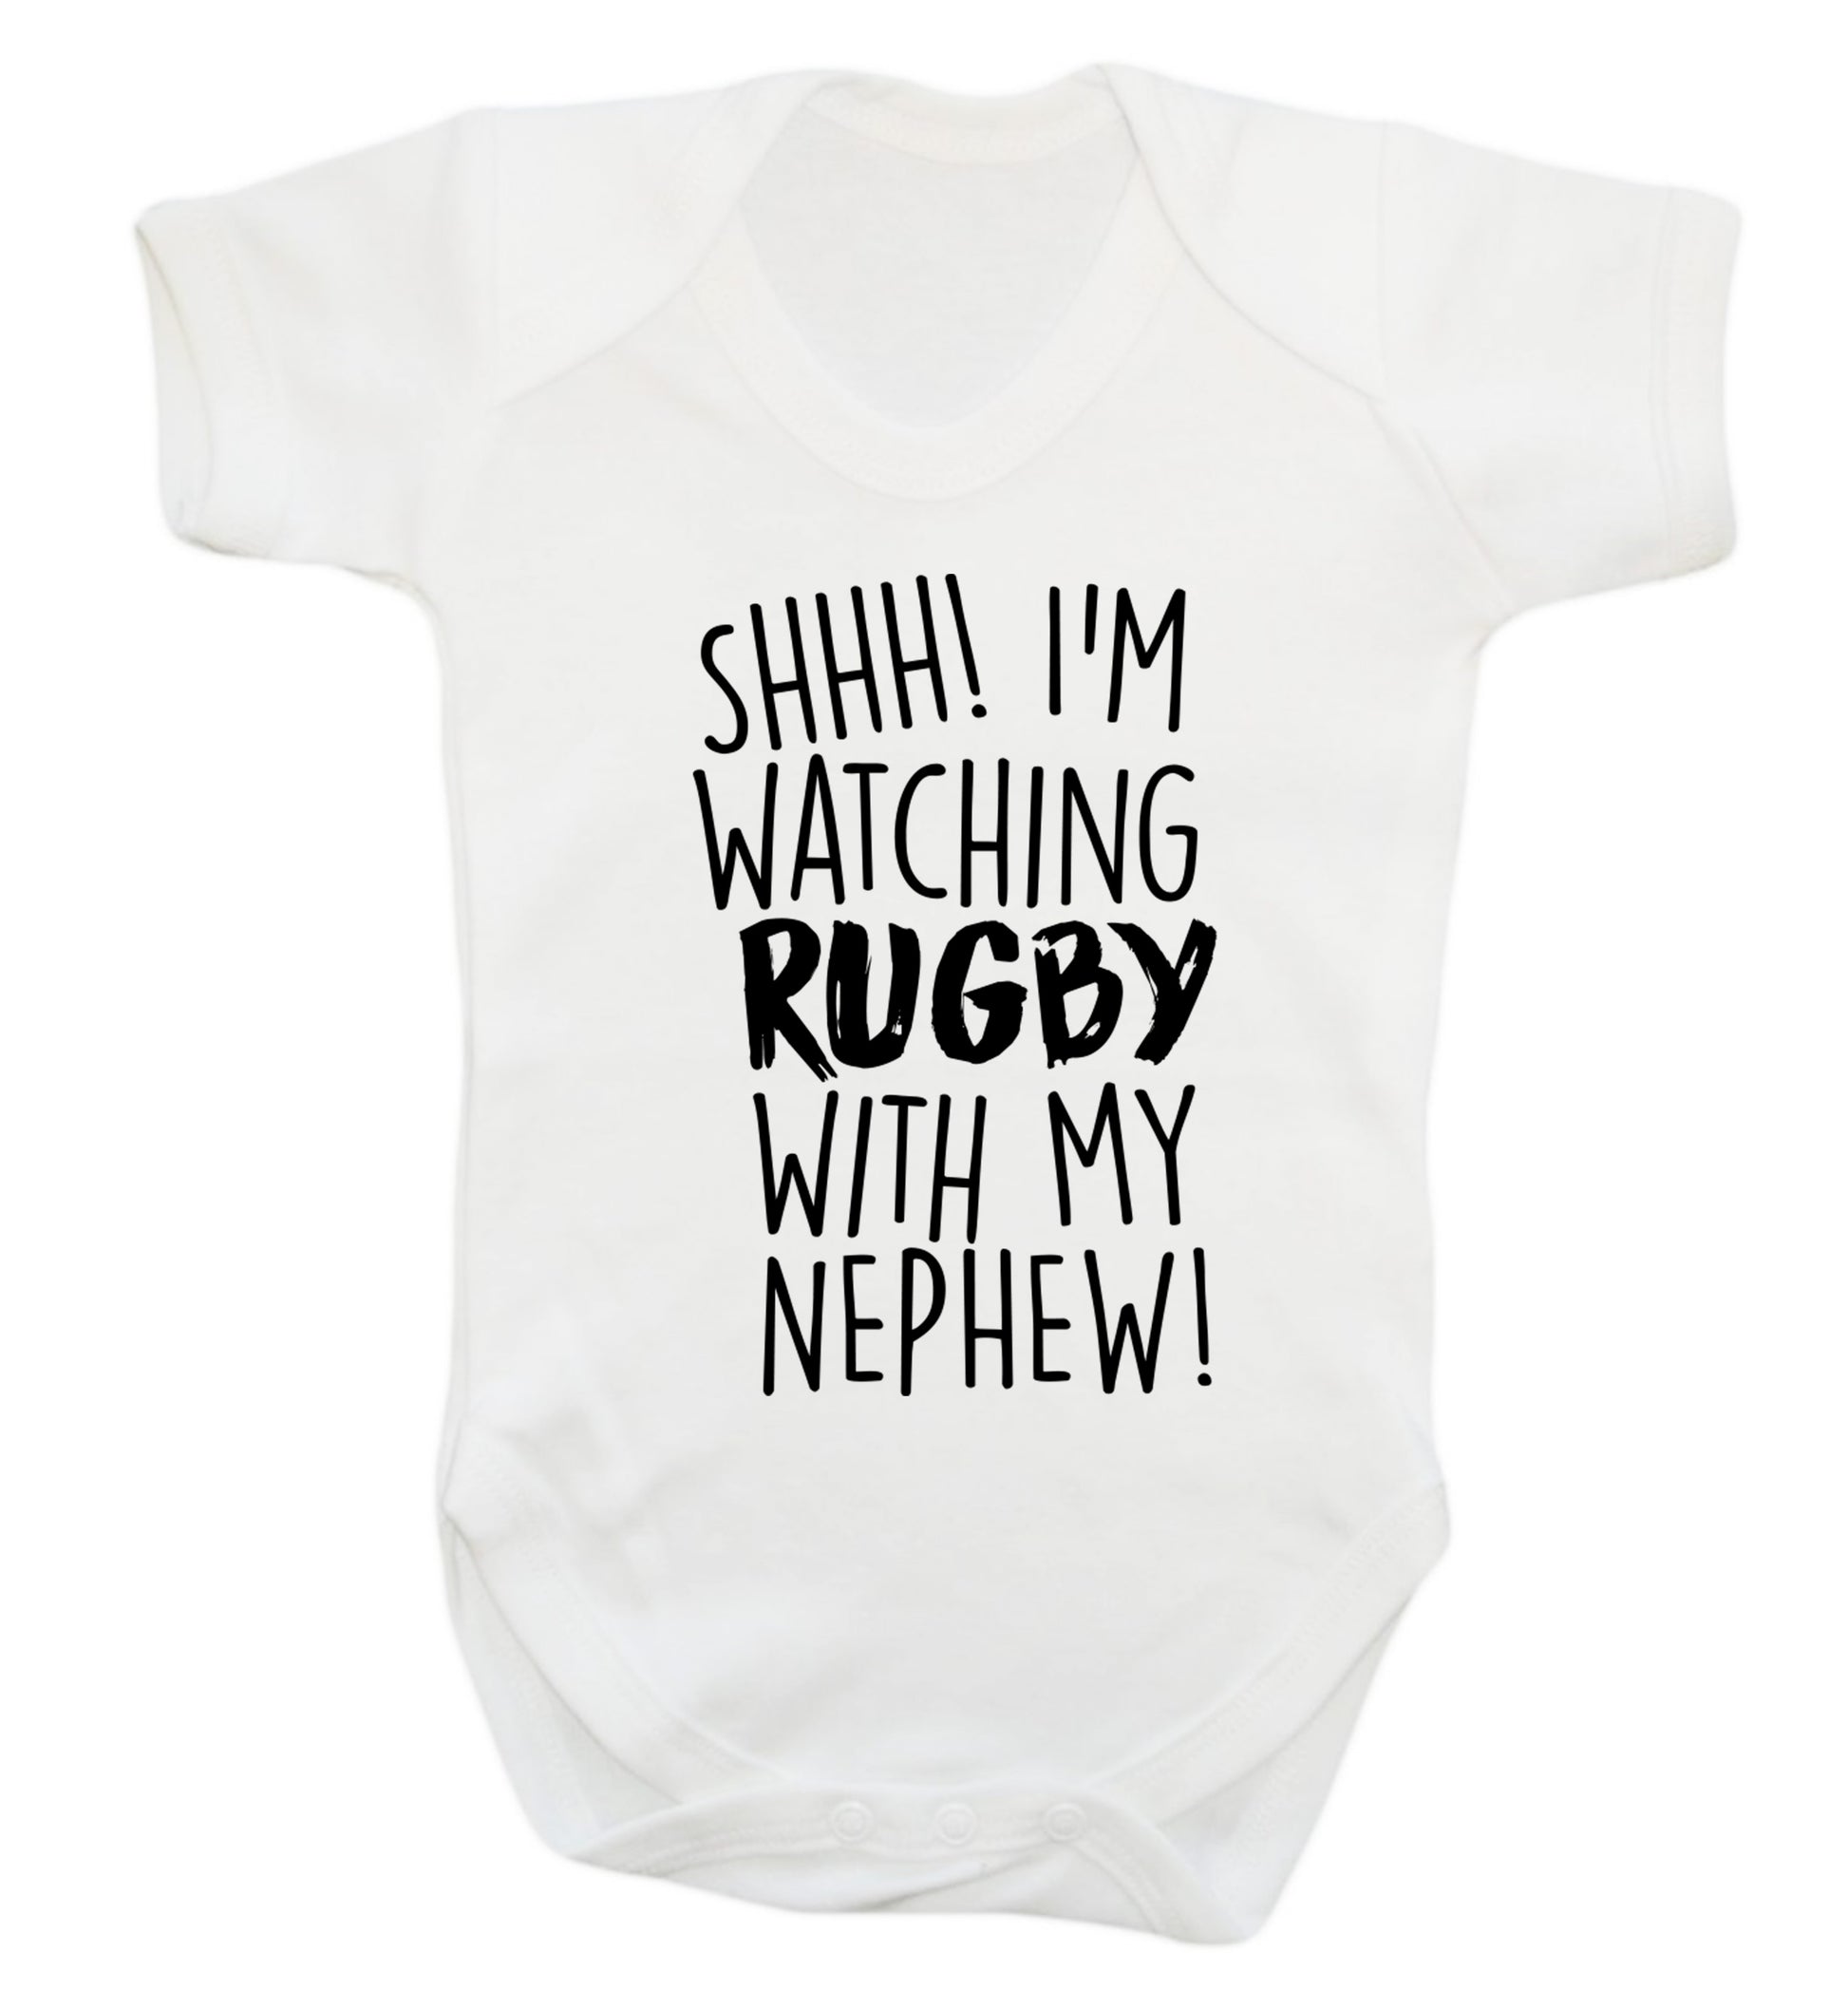 Shh.. I'm watching rugby with my nephew Baby Vest white 18-24 months